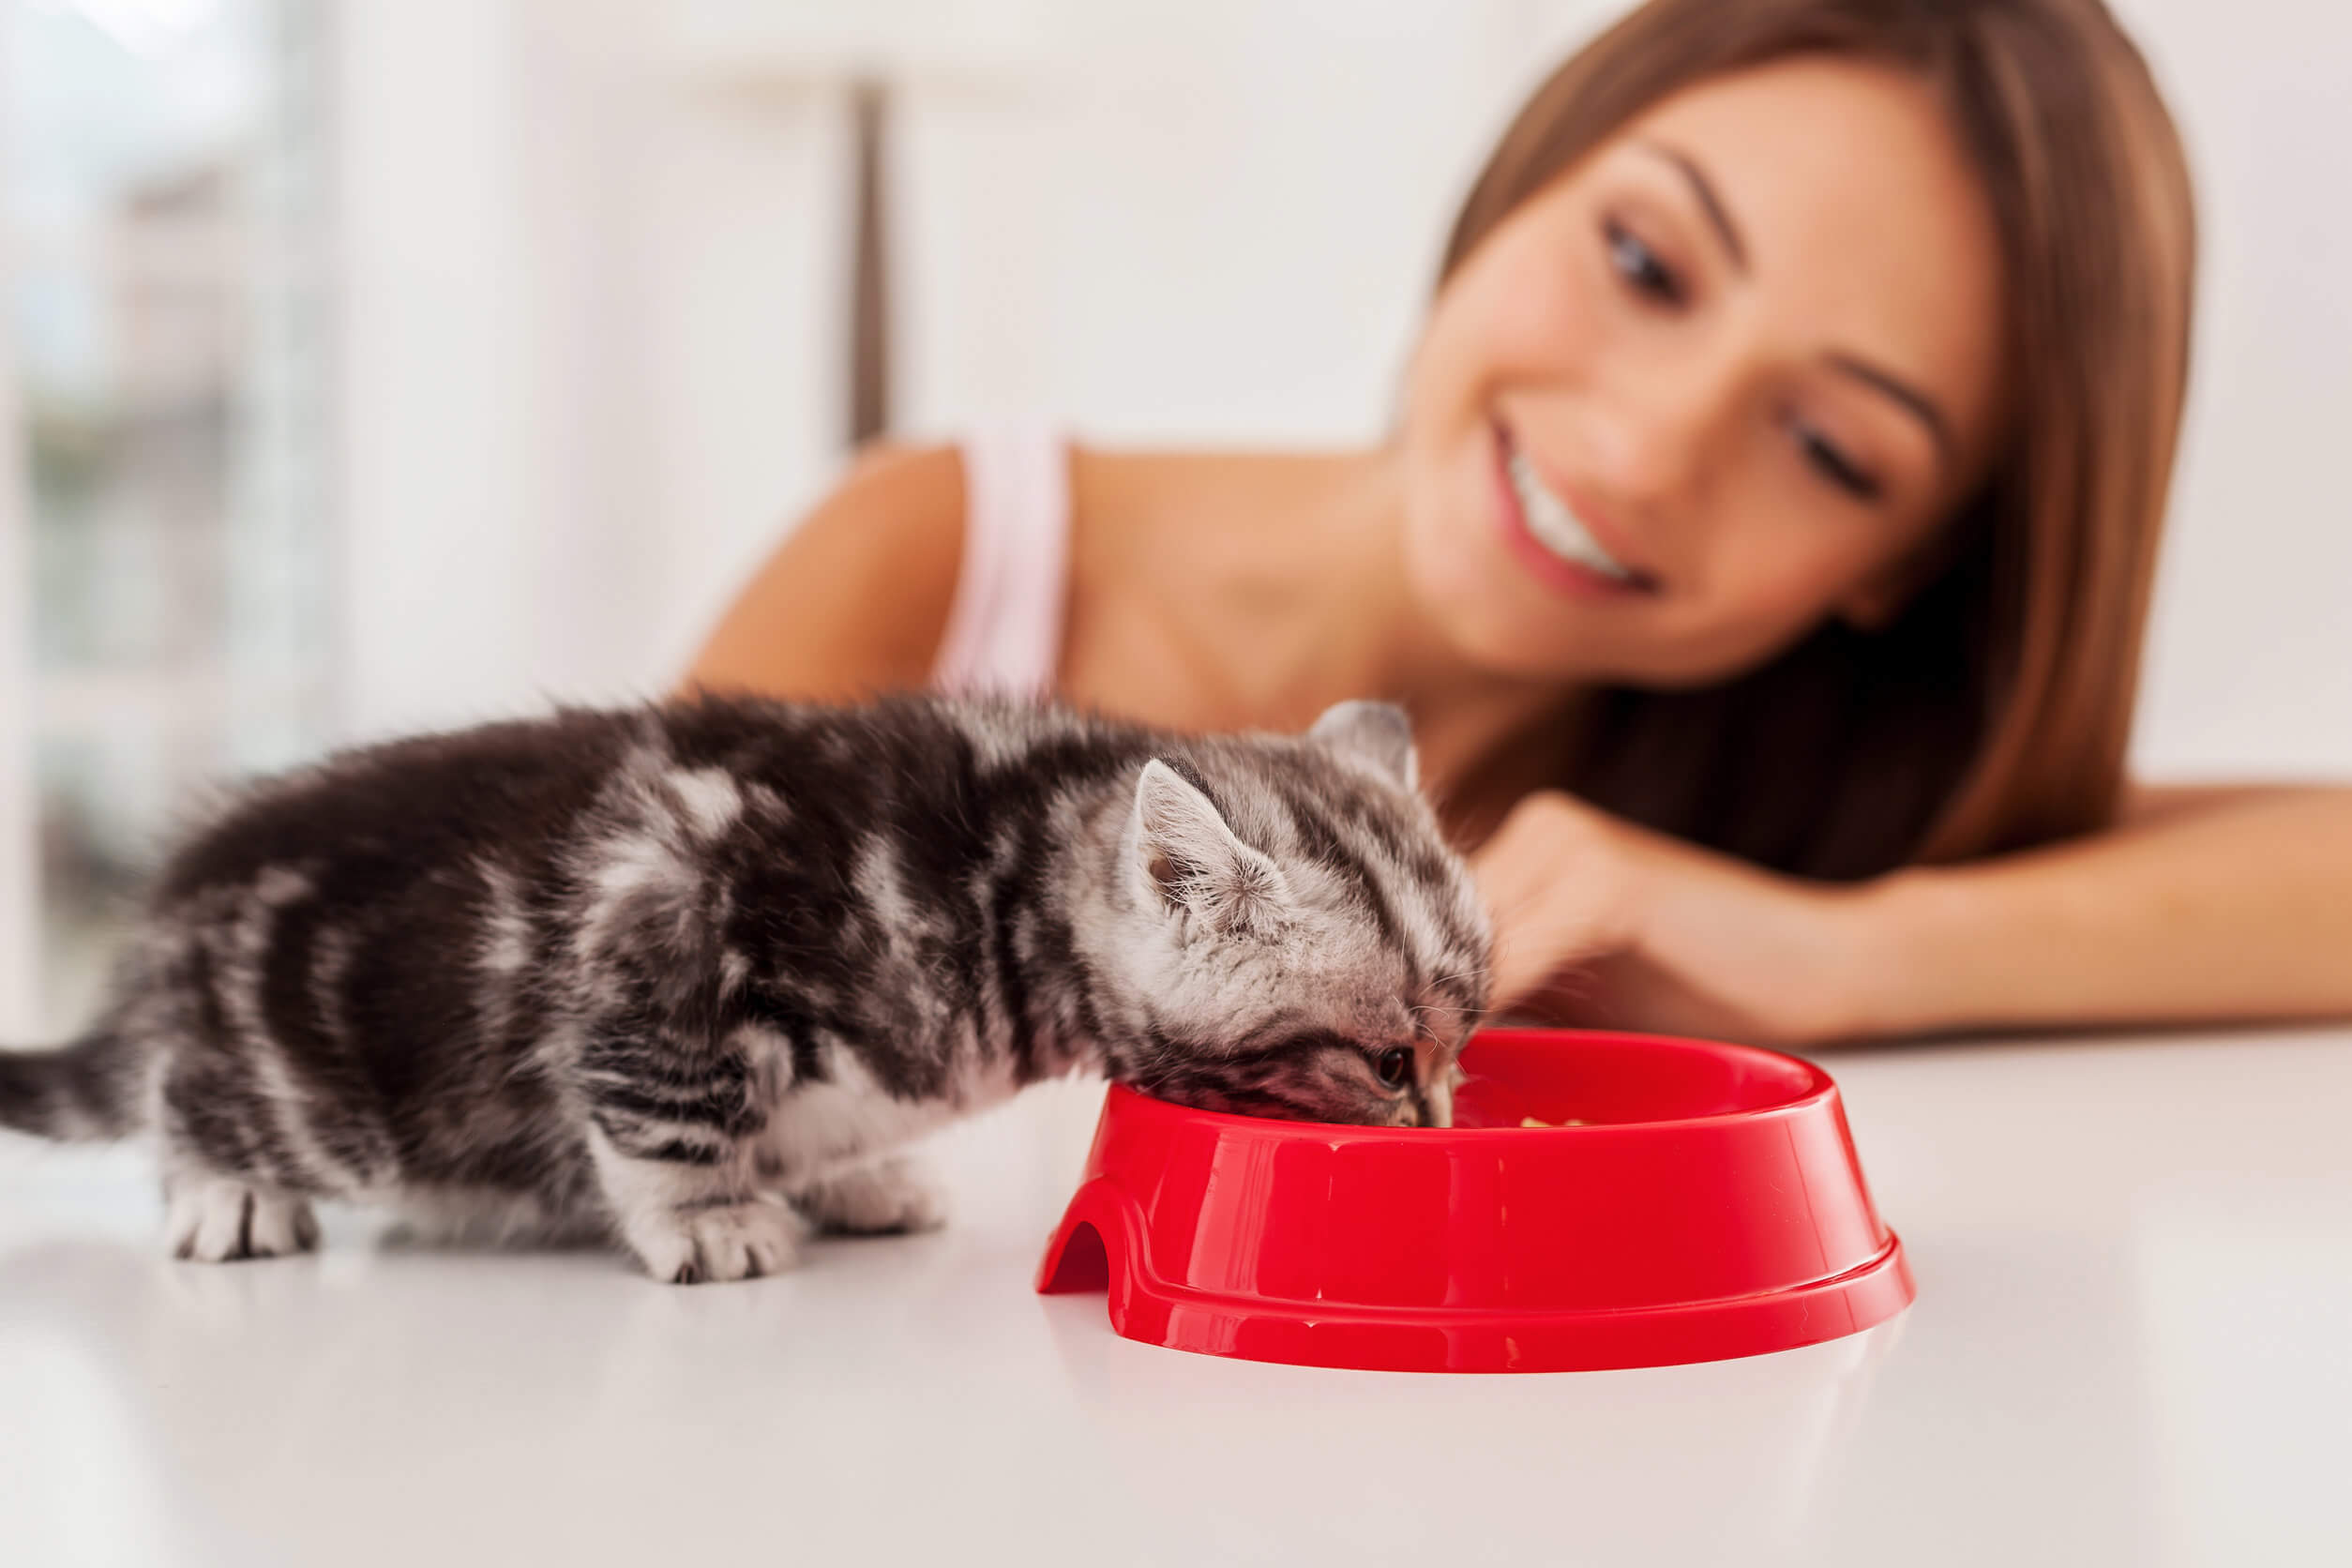 A woman feeding a kitten: Cat therapy